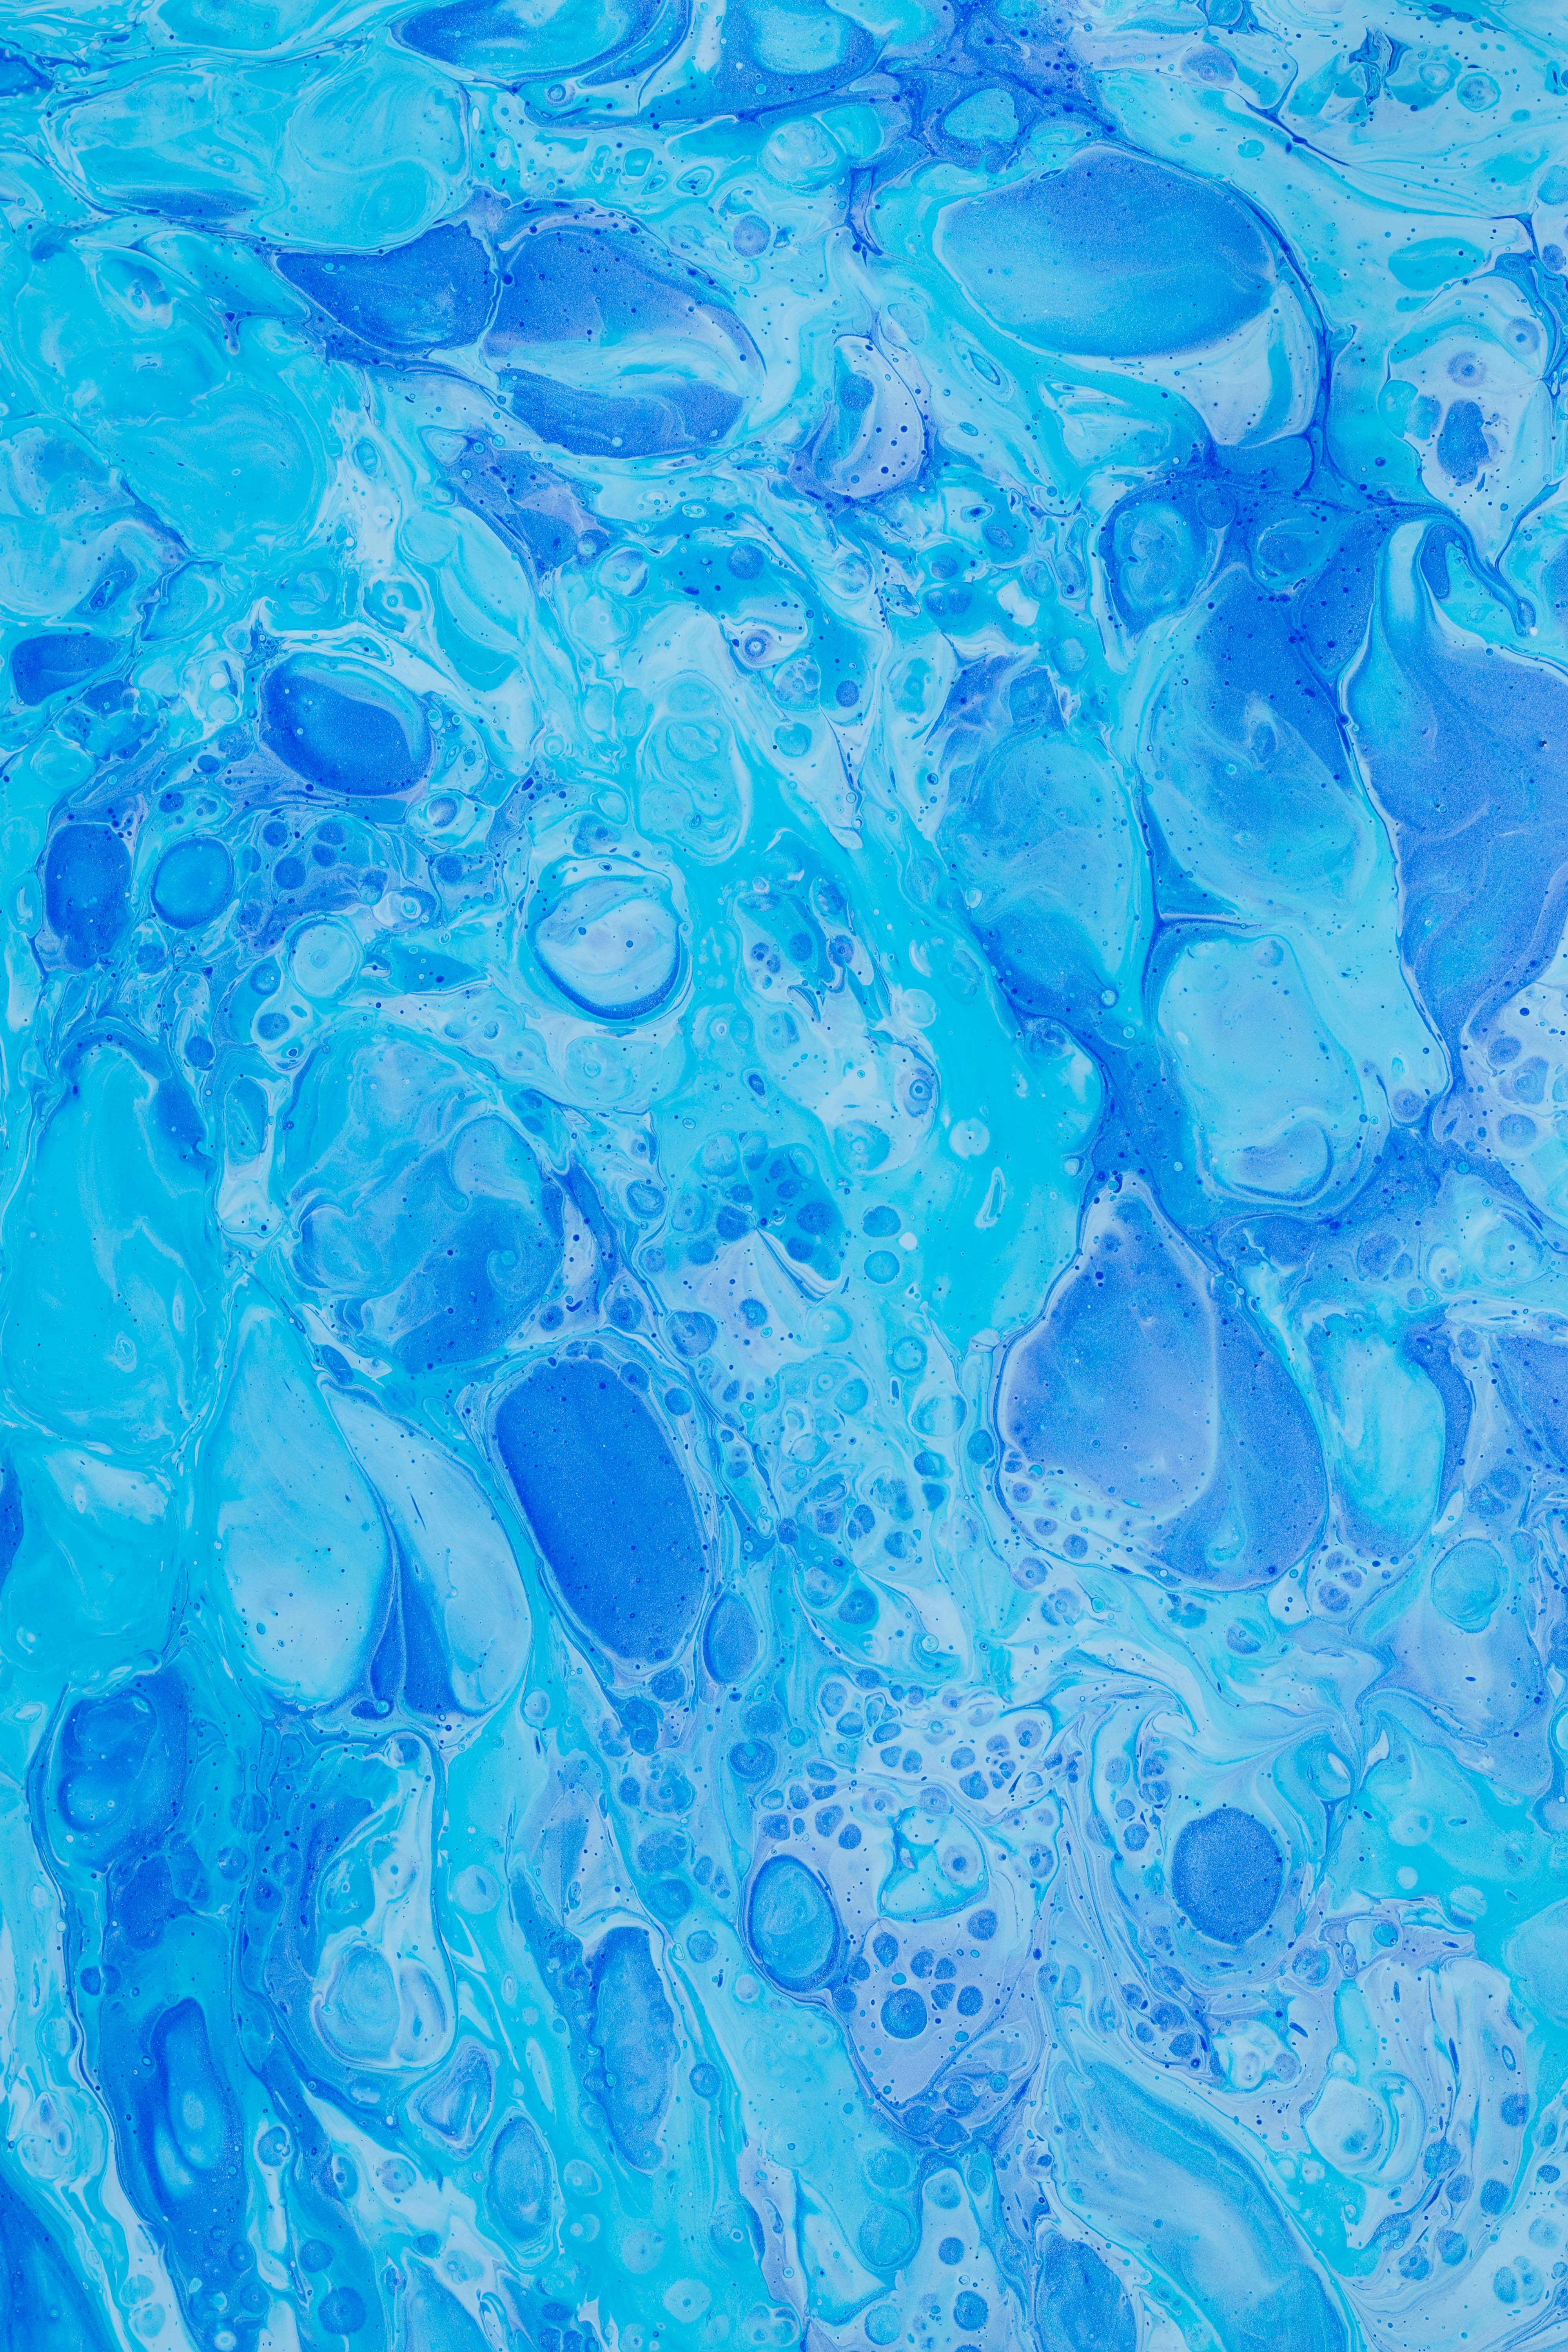 Watercolor blue, paint, stains, abstract 4k Wallpaper